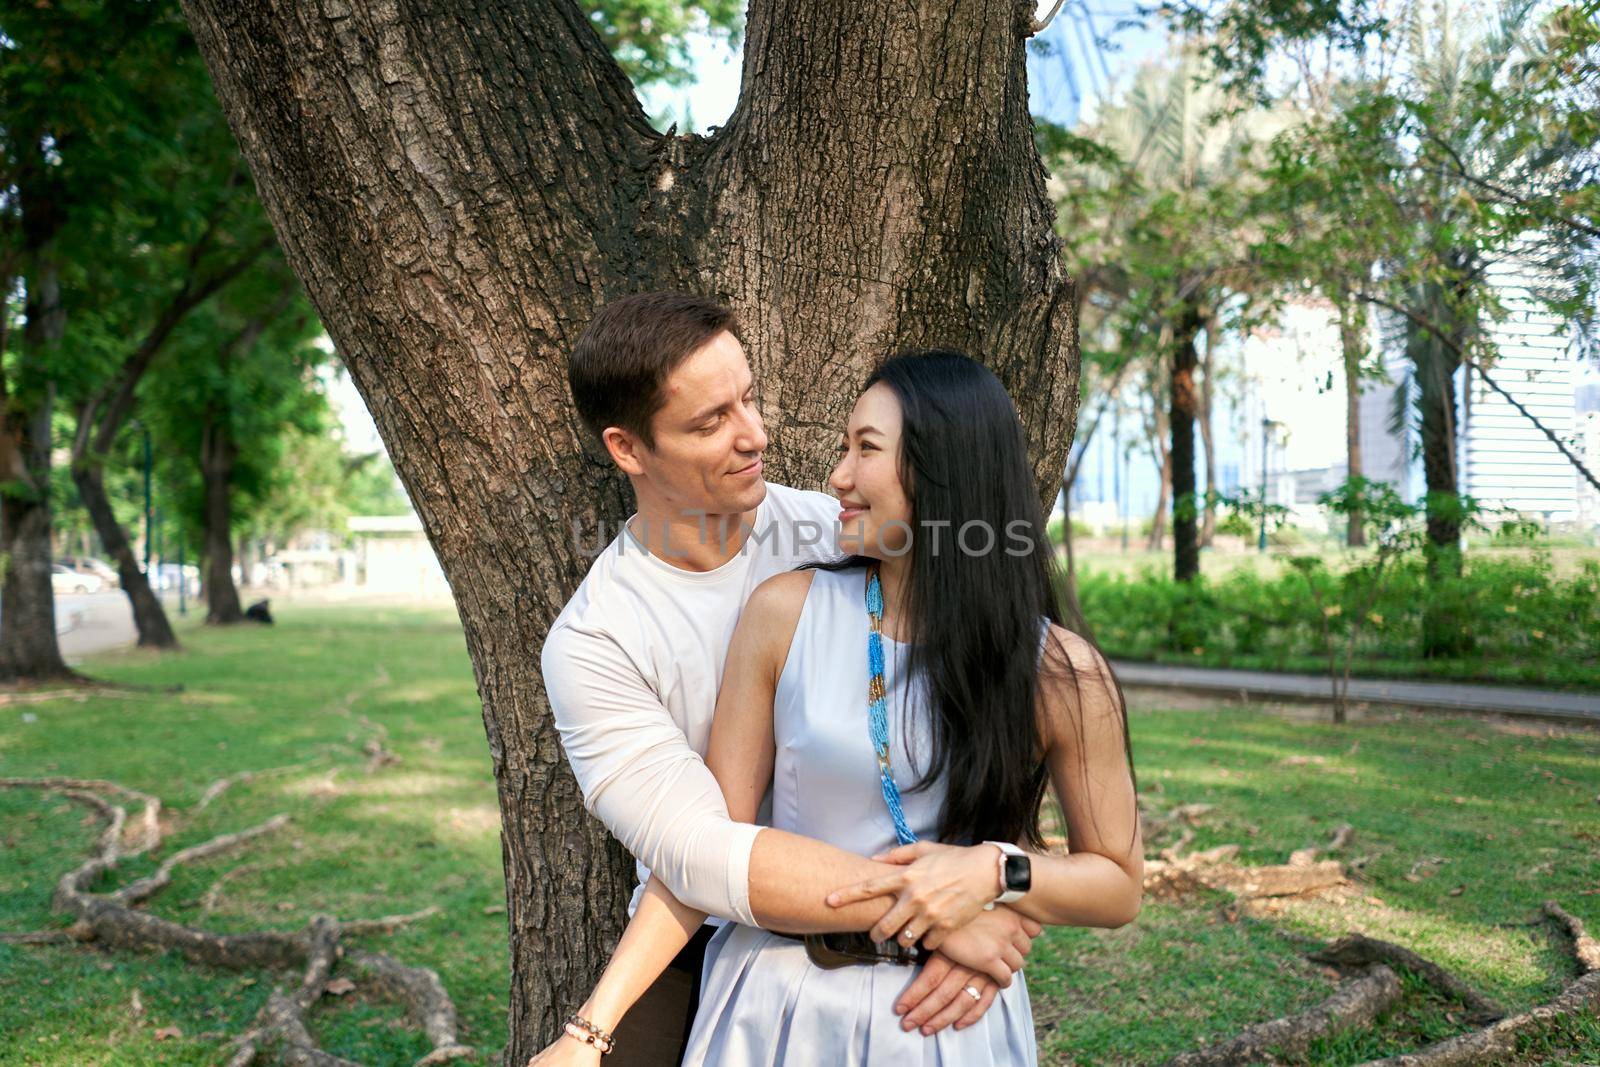 Close up portrait of a newly married couple embracing next to a tree in a park